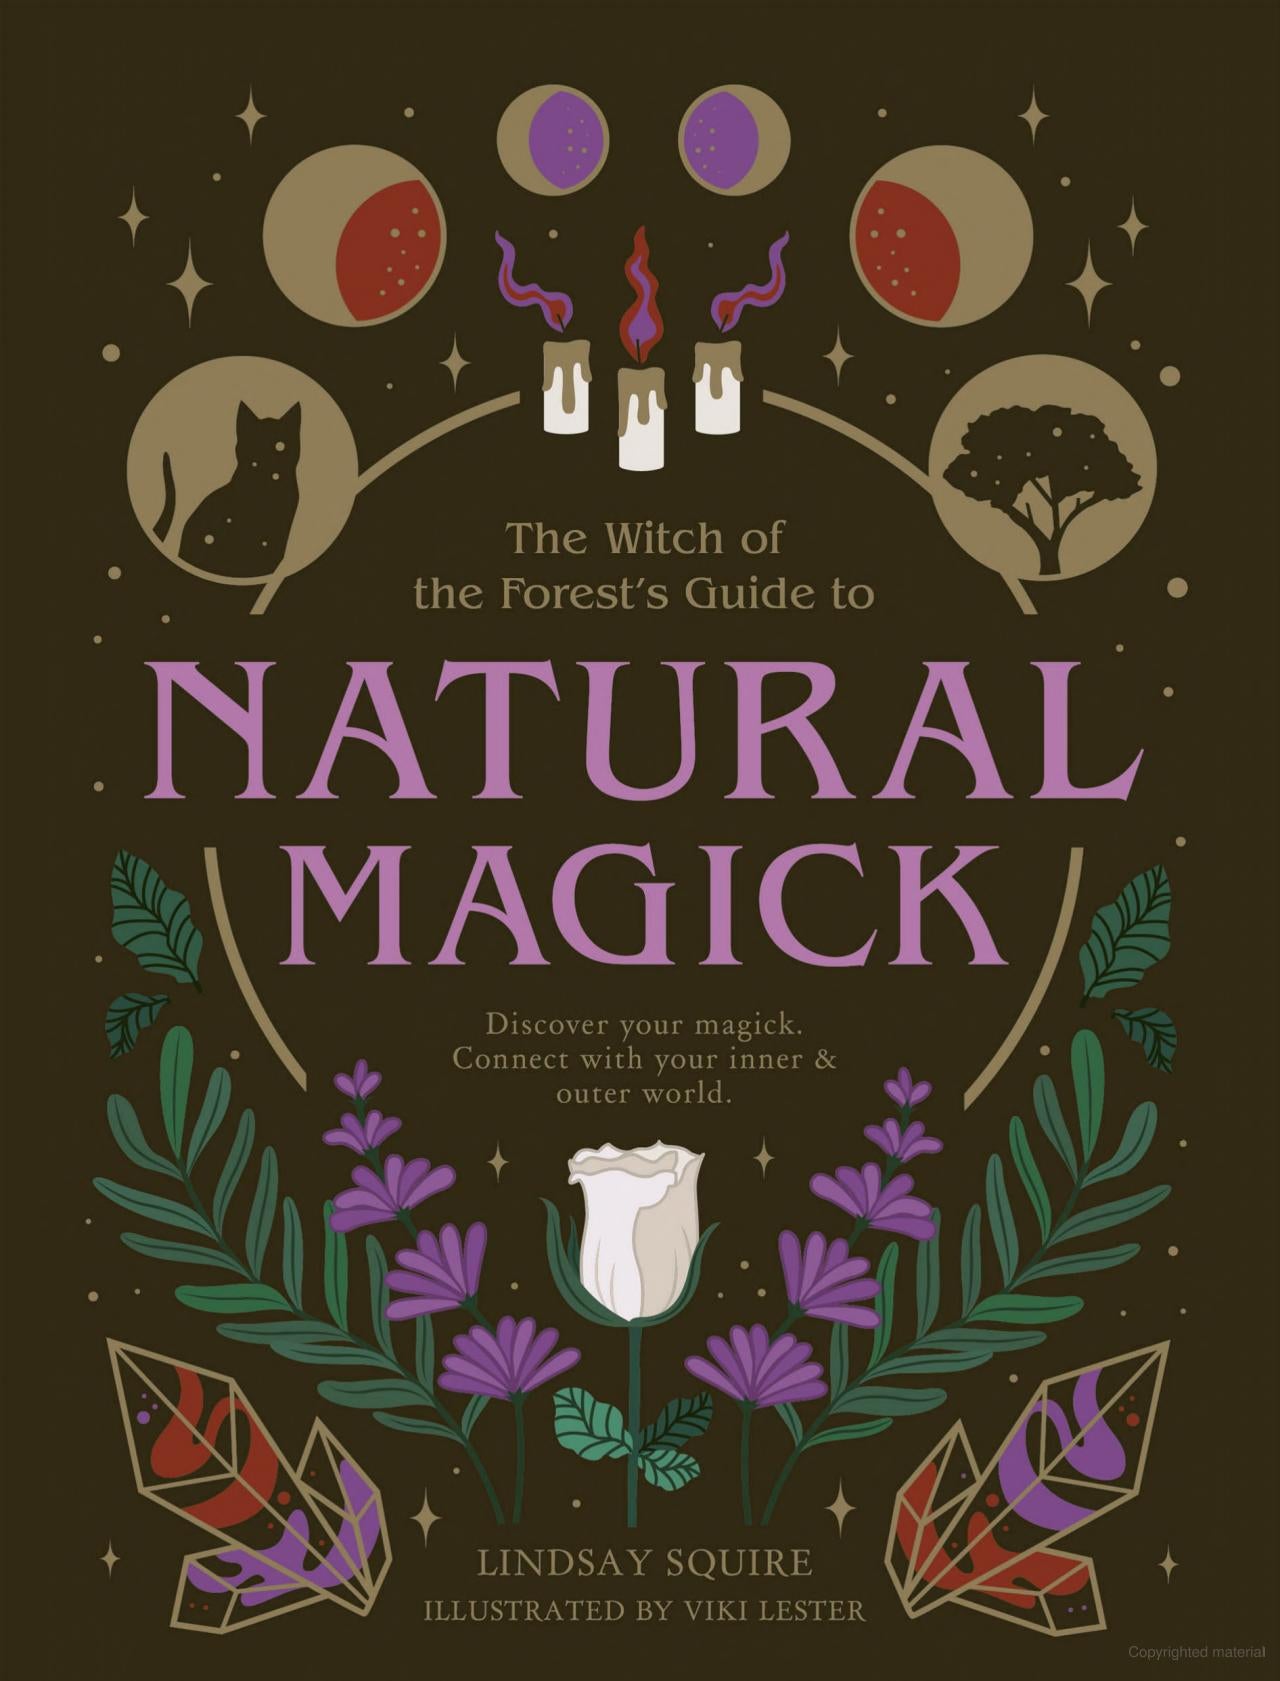 The Witch of the Forest's Guide to Natural Magick